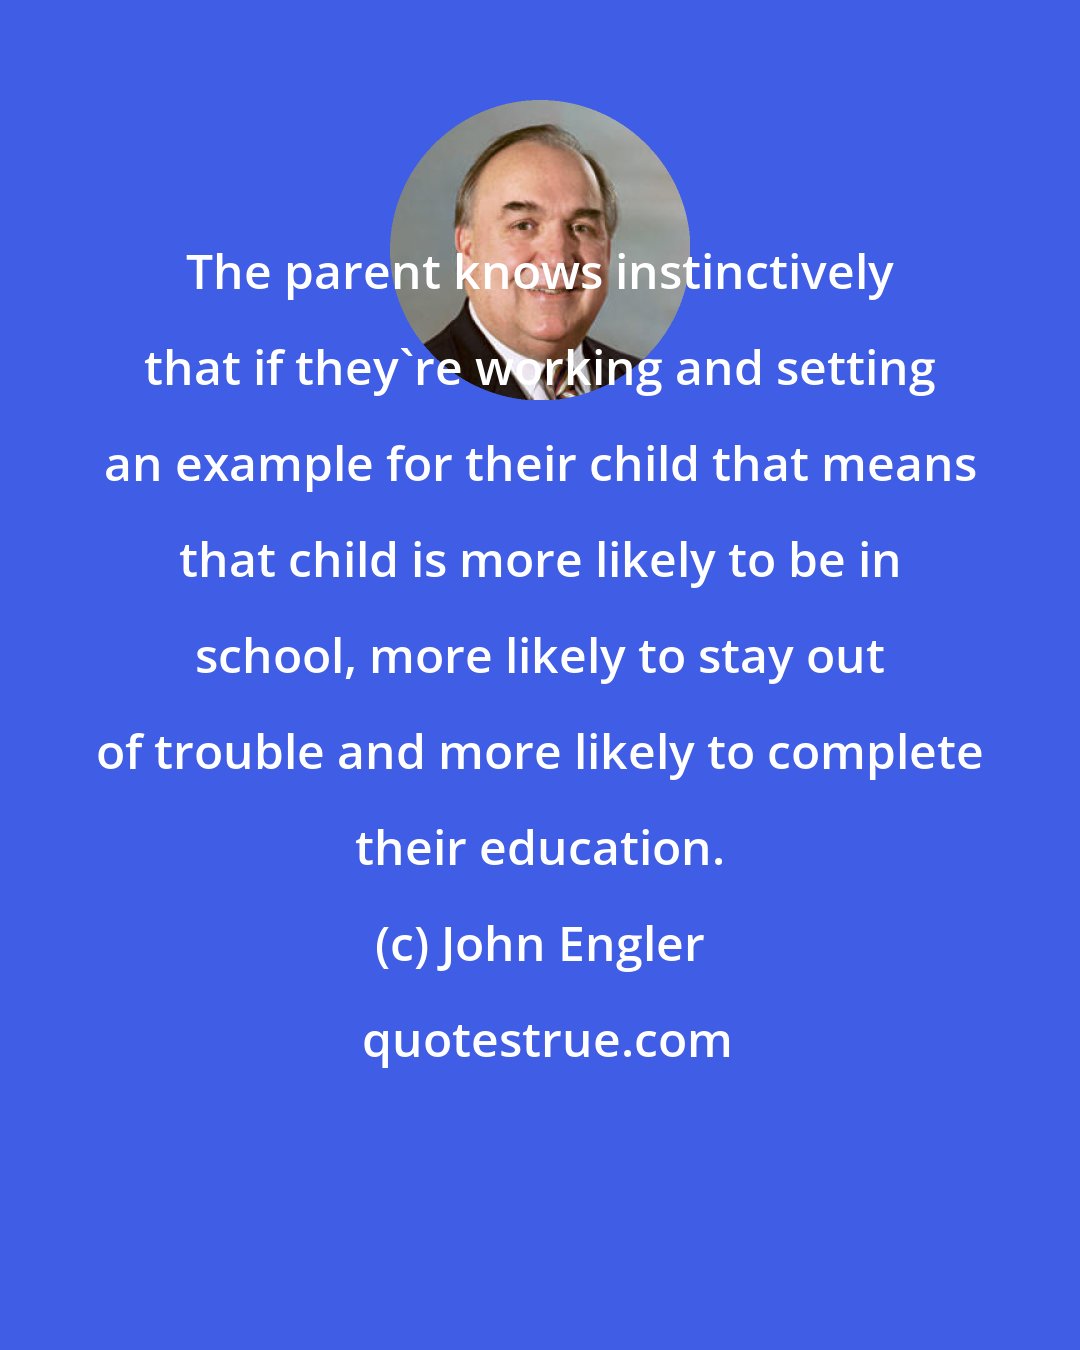 John Engler: The parent knows instinctively that if they're working and setting an example for their child that means that child is more likely to be in school, more likely to stay out of trouble and more likely to complete their education.